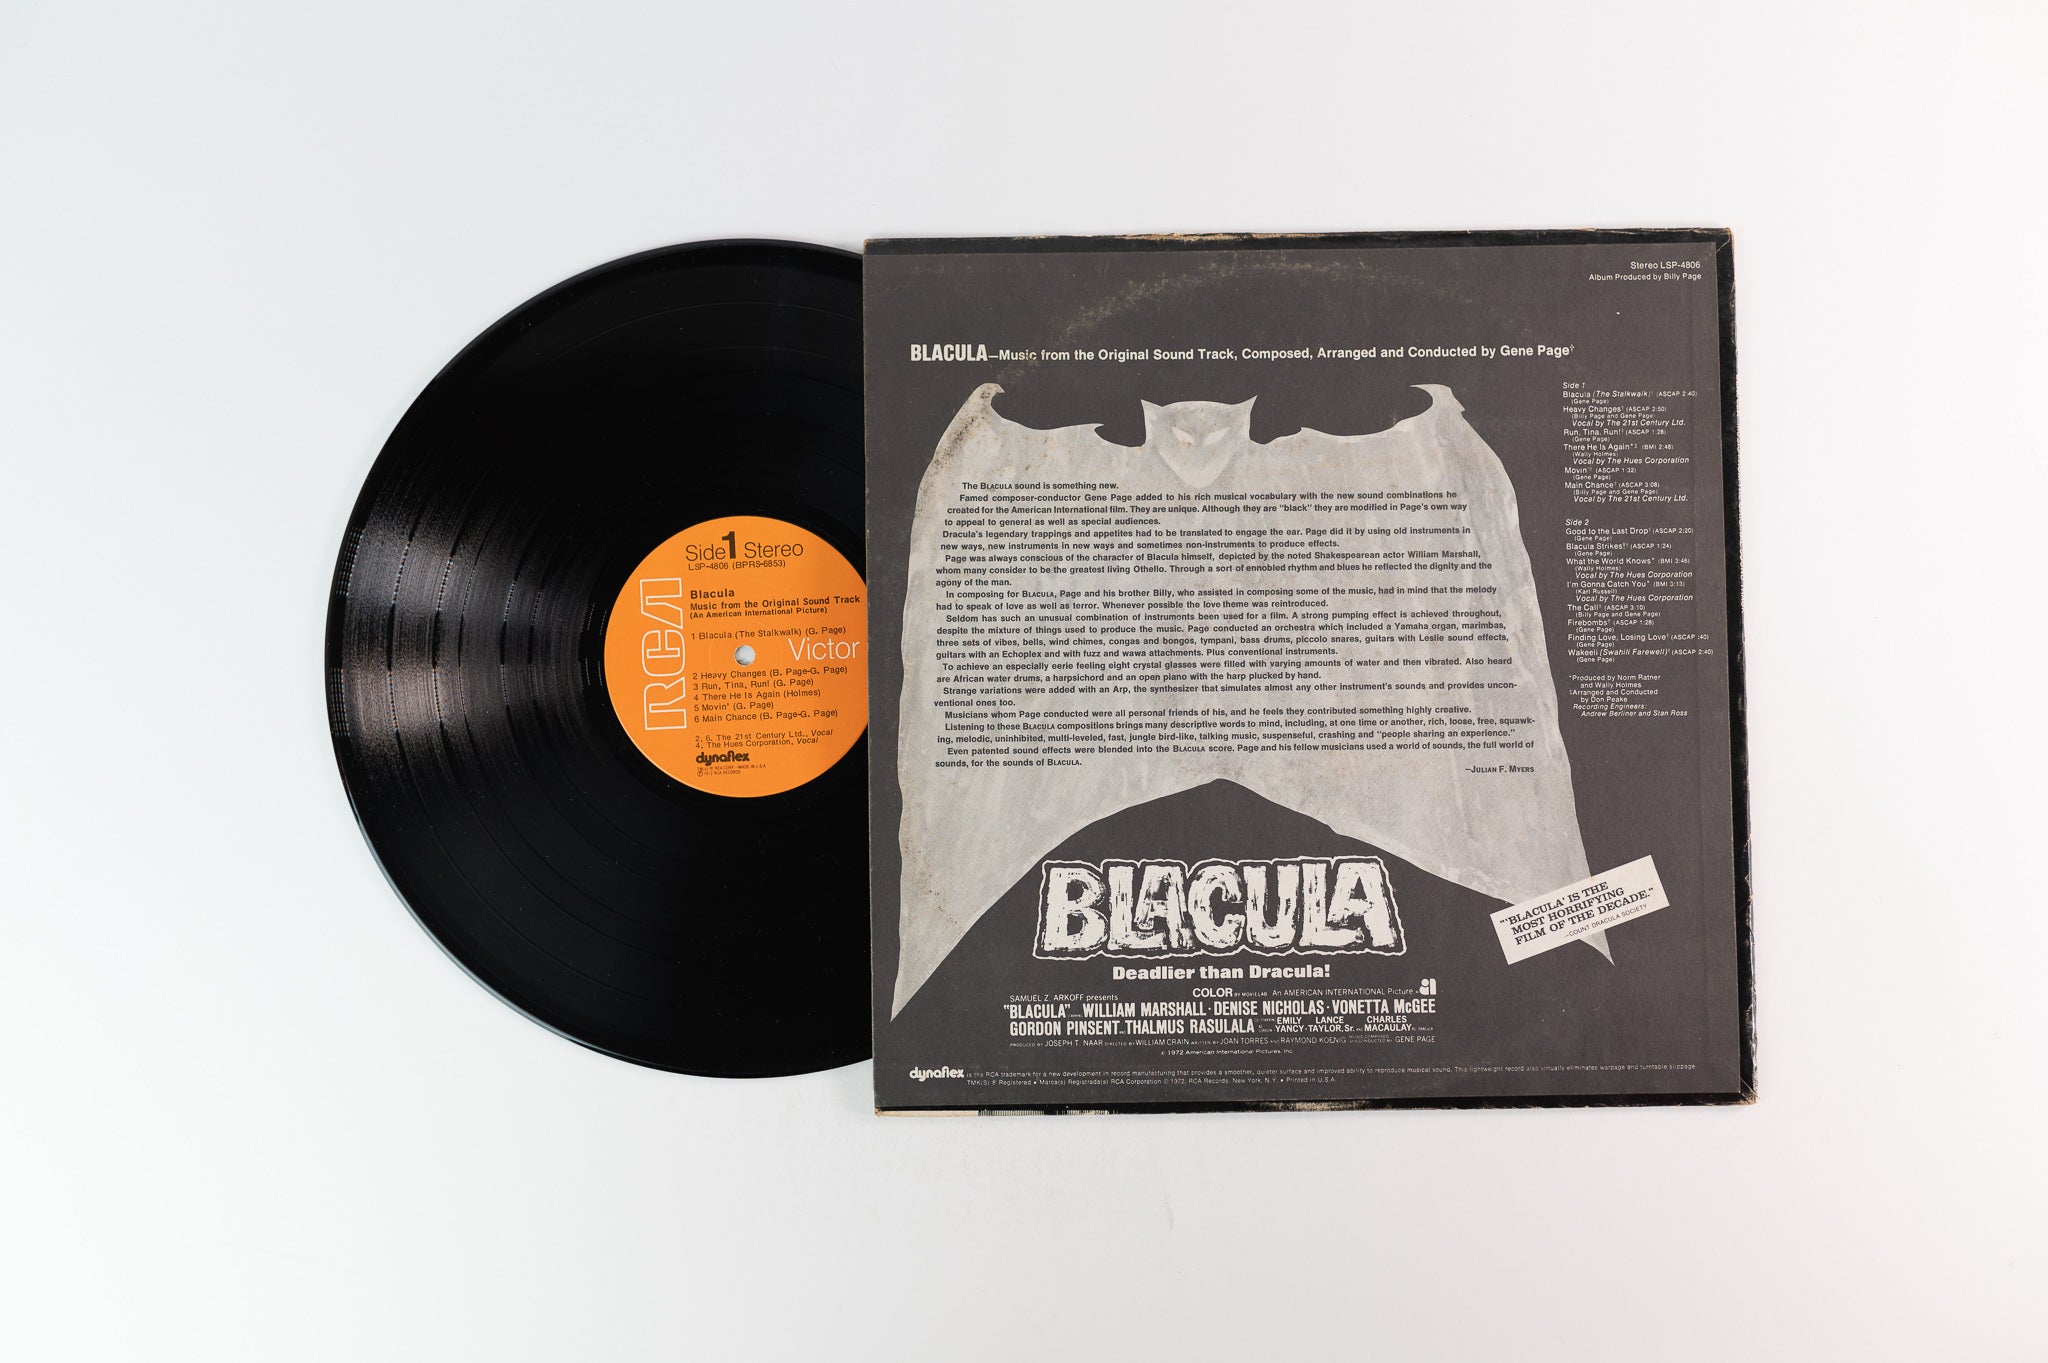 Gene Page - Blacula (Music From The Original Soundtrack) on RCA